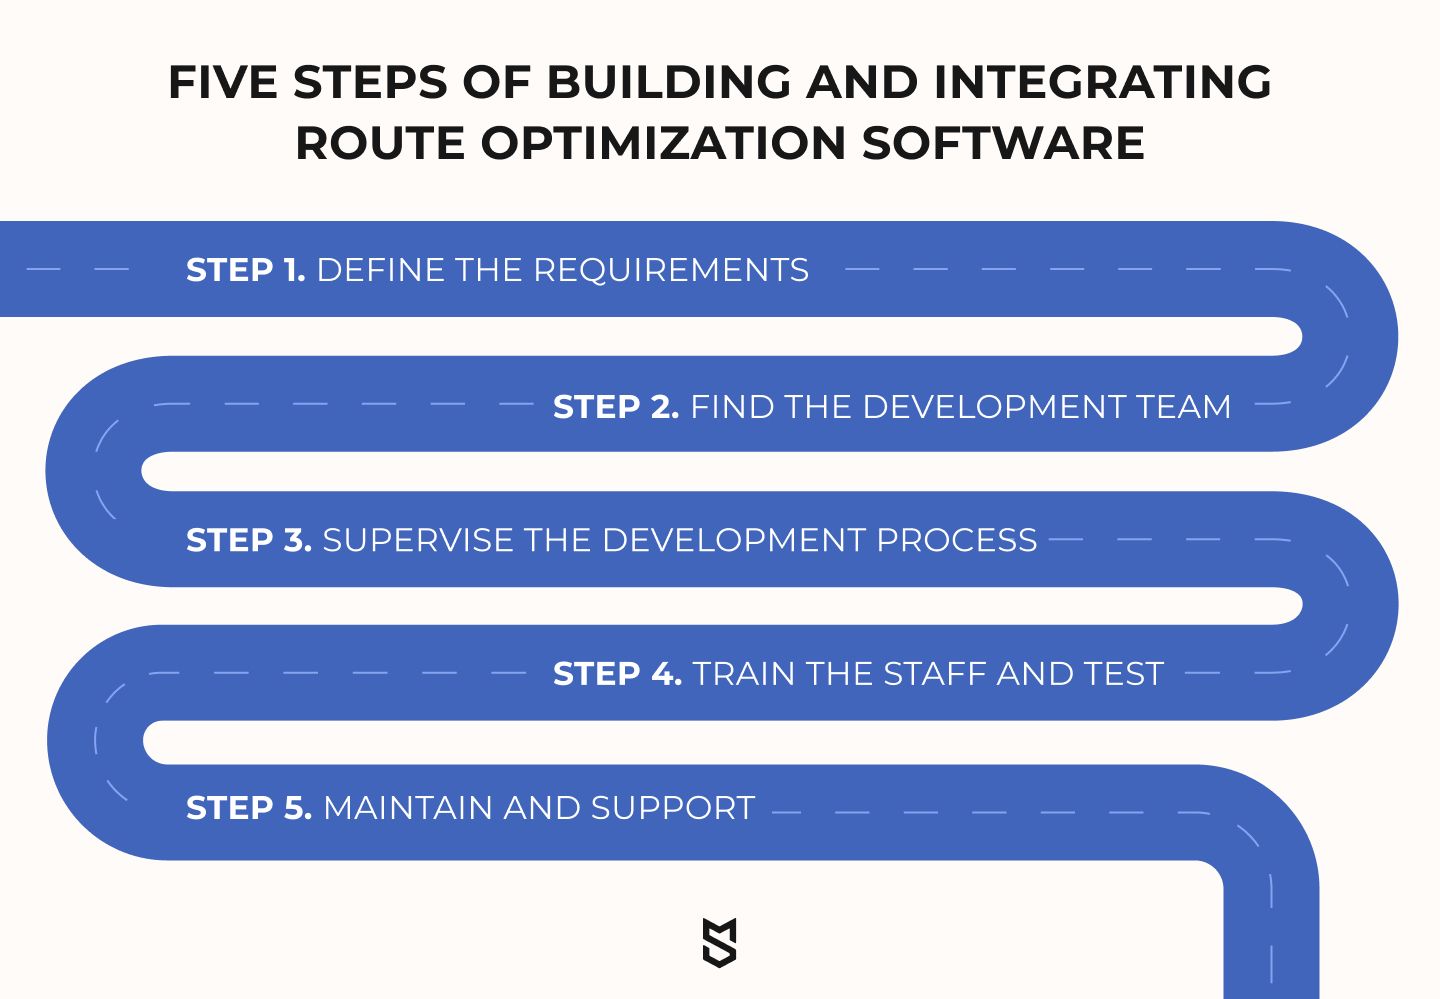 Five steps of building and integrating route optimization software